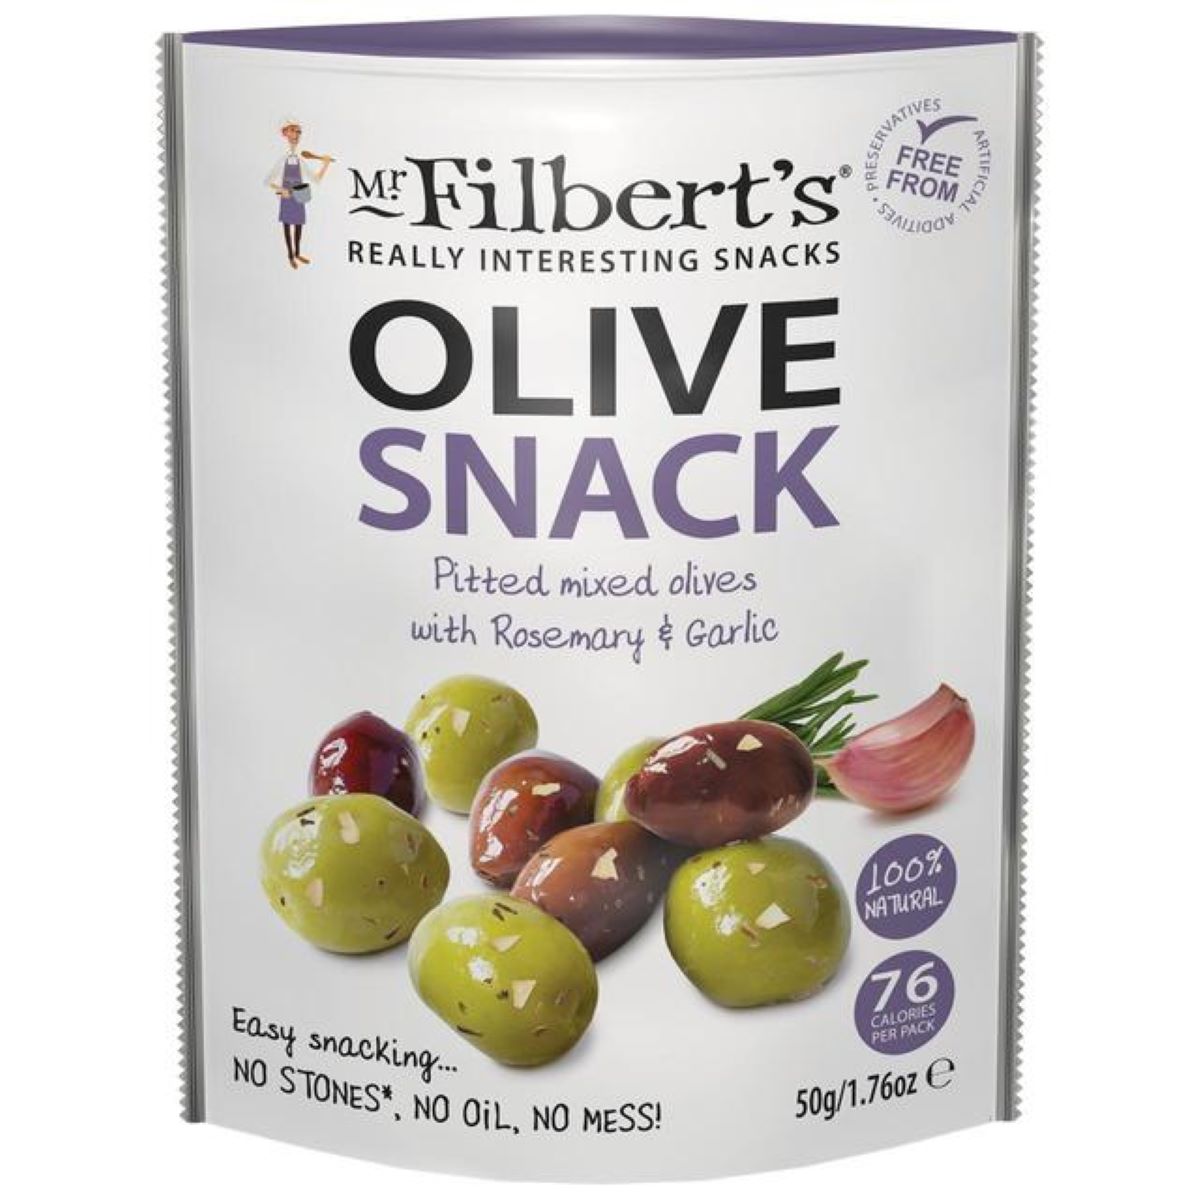 Mr Filberts Olive Snacks Mixed Olives with Rosemary & Garlic 50g